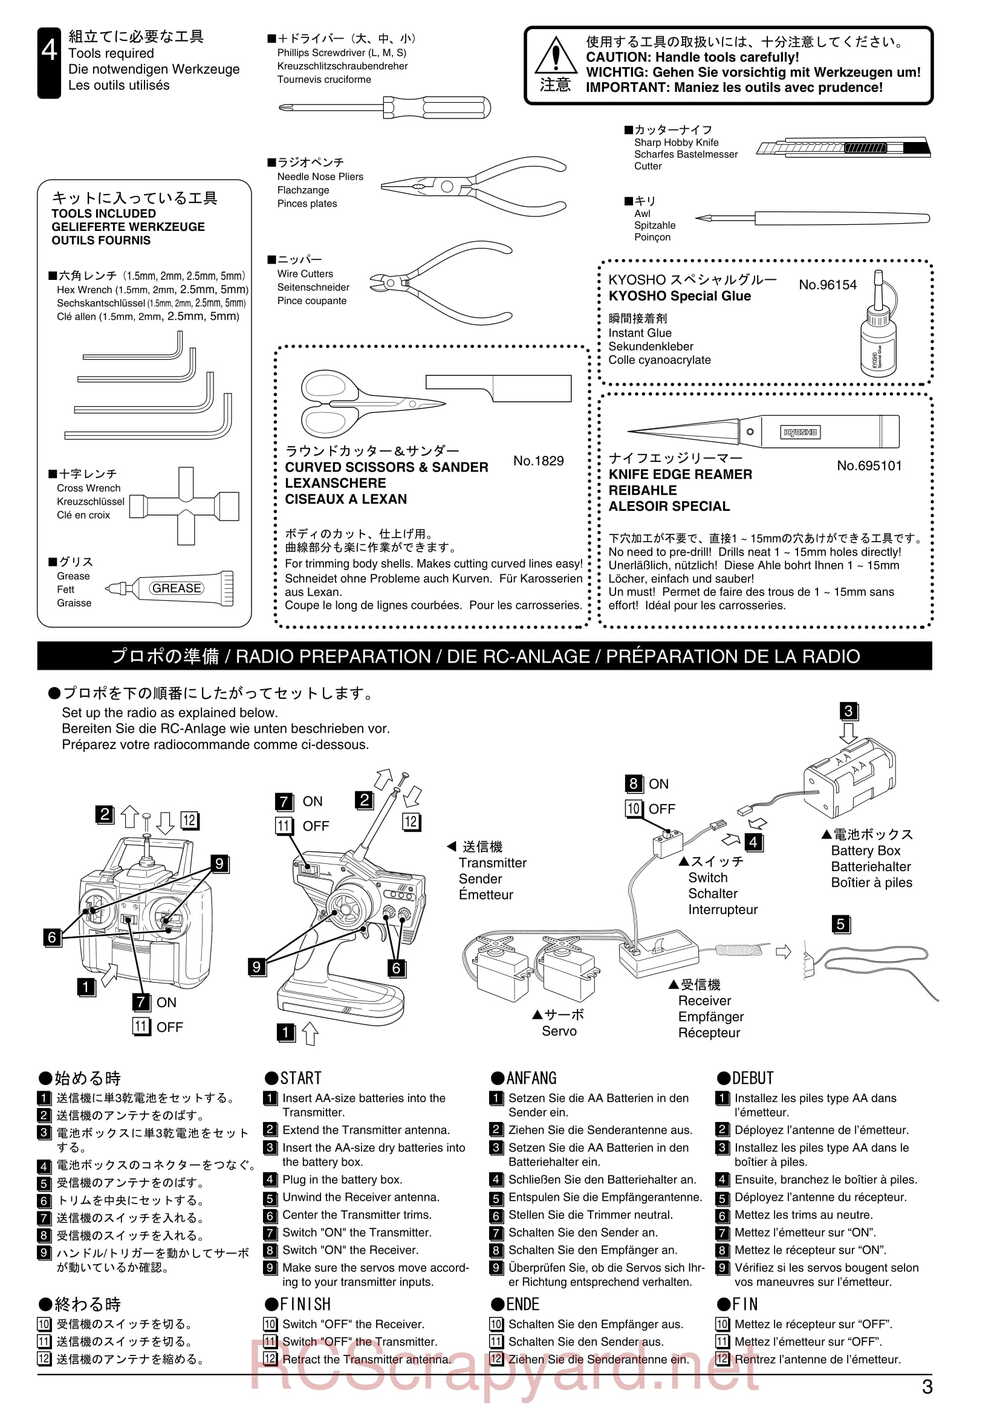 Kyosho - 31122 - V-One S2 - Manual - Page 03